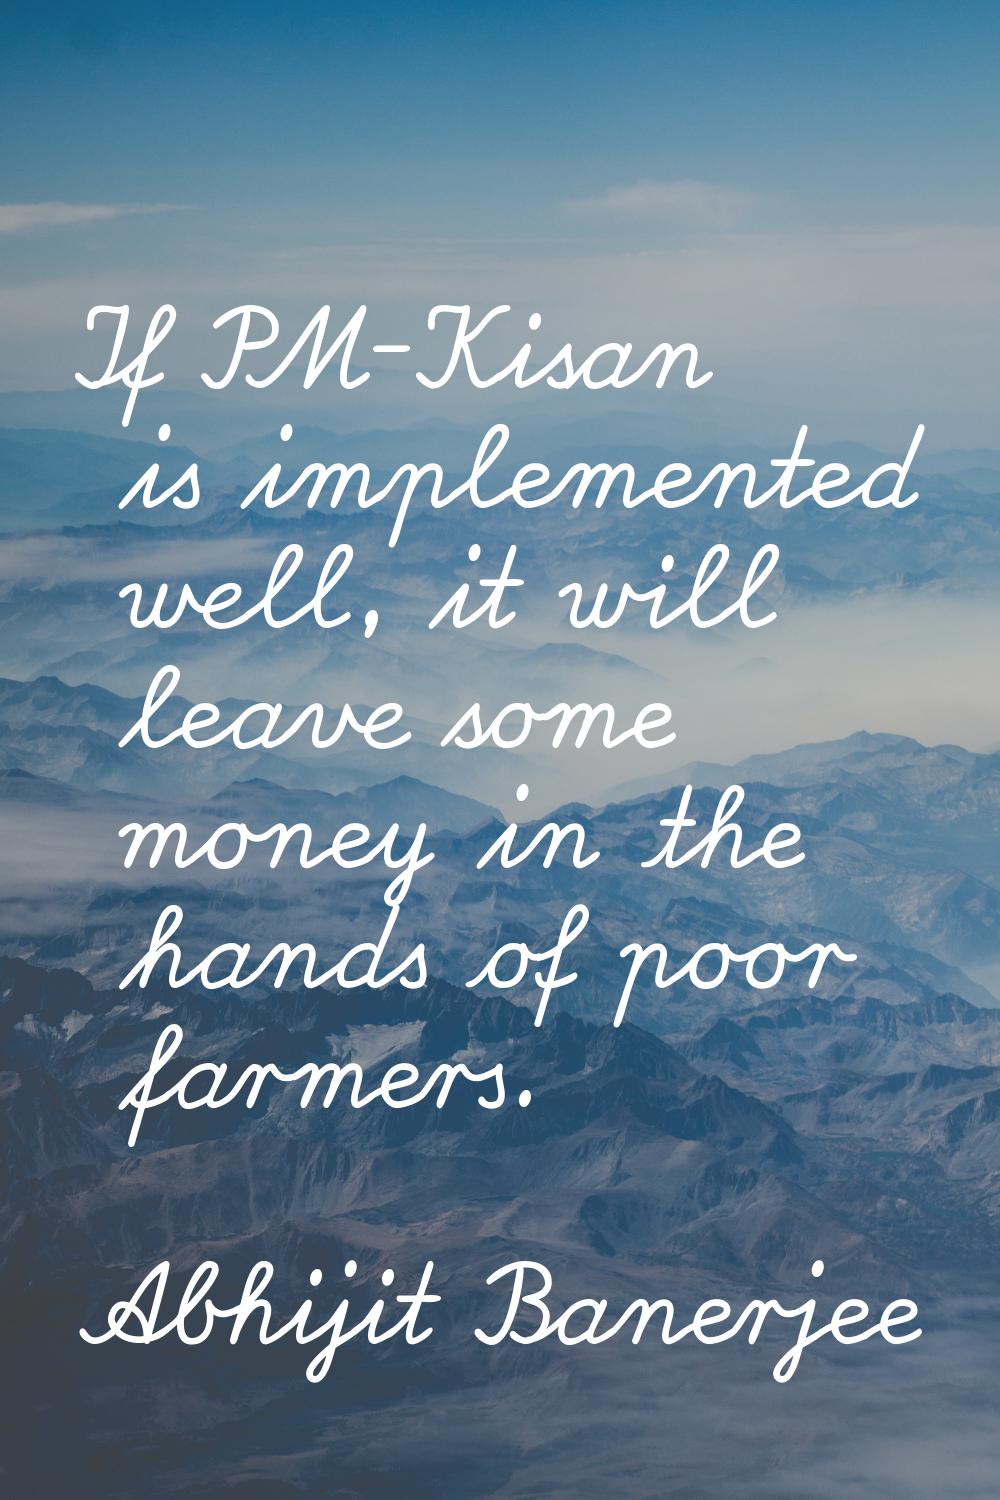 If PM-Kisan is implemented well, it will leave some money in the hands of poor farmers.